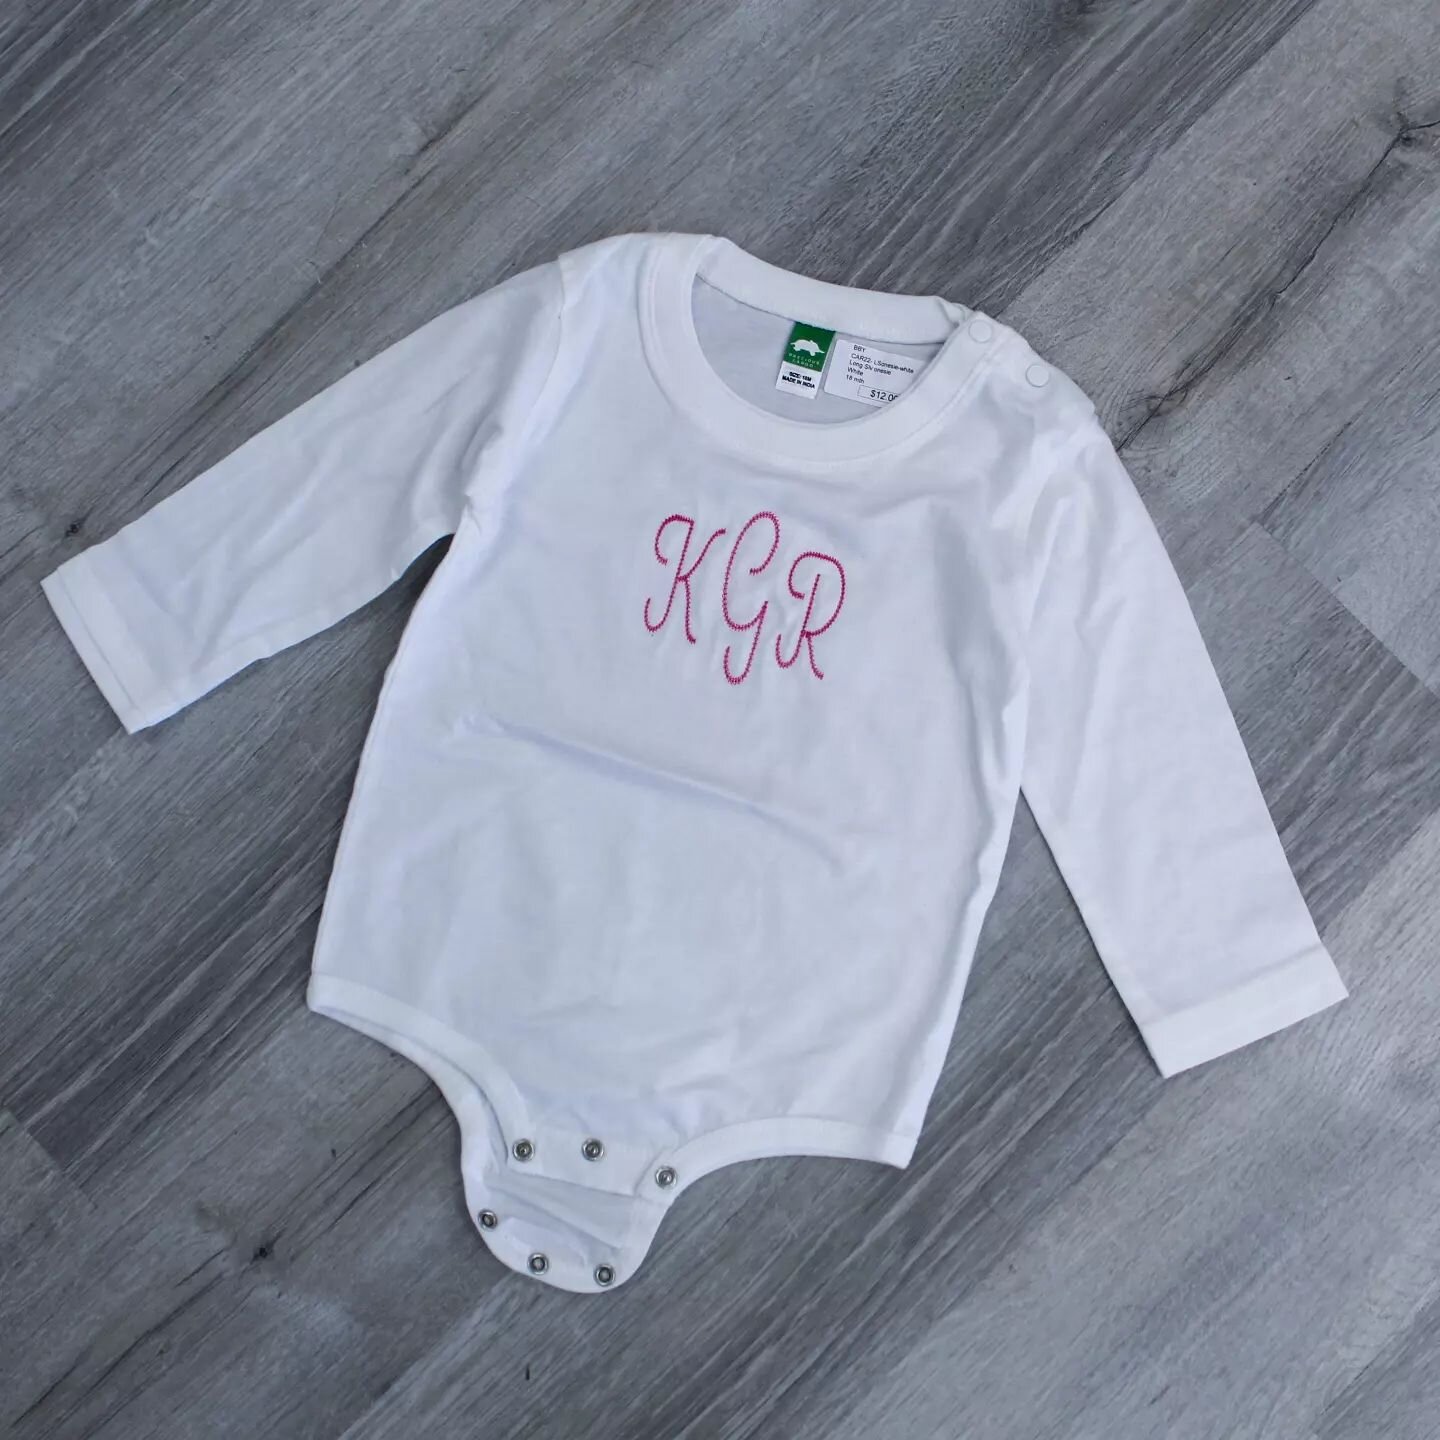 With some more cold weather in the forecast, make sure your little ones are warm and comfortable! Add their name or monogrmlam in their favorite color, and give them something that they'll love!
.
.
.
.
.
#monogrameverythingregretnothing #atlanticemb